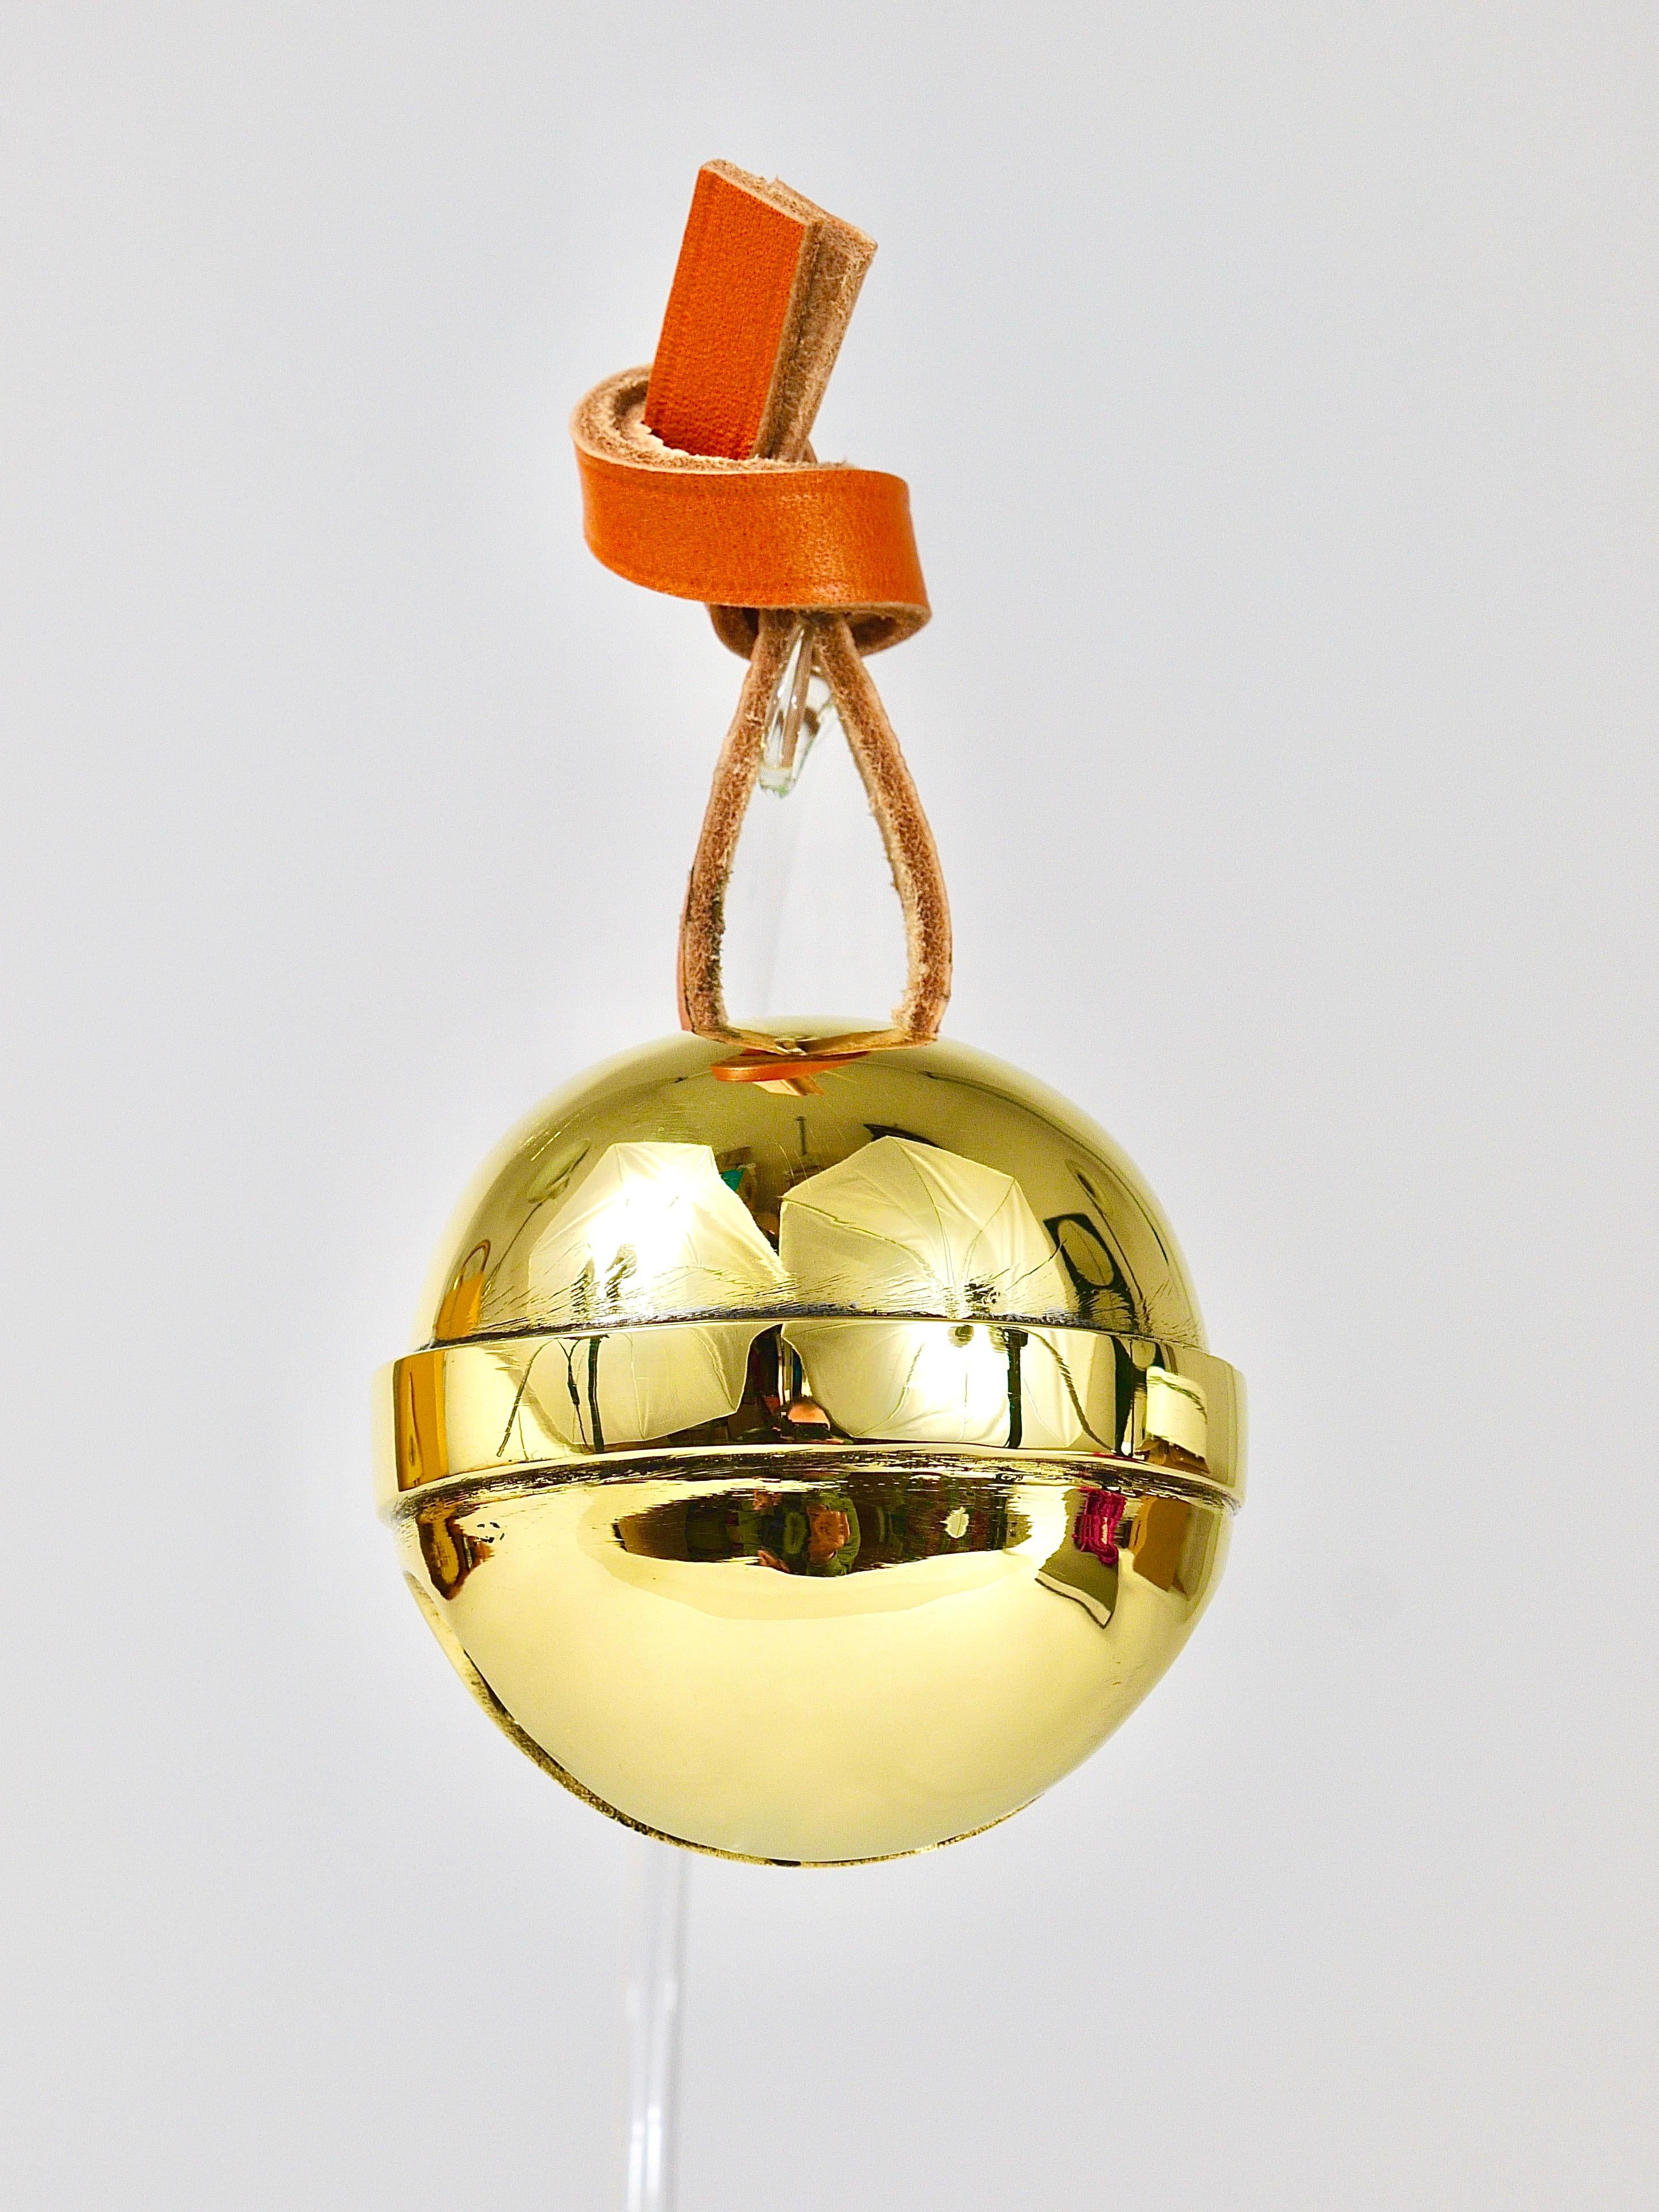 20th Century Carl Auböck Handcrafted Paperweight Jingle Bell #5039, Brass, Leather, Austria For Sale